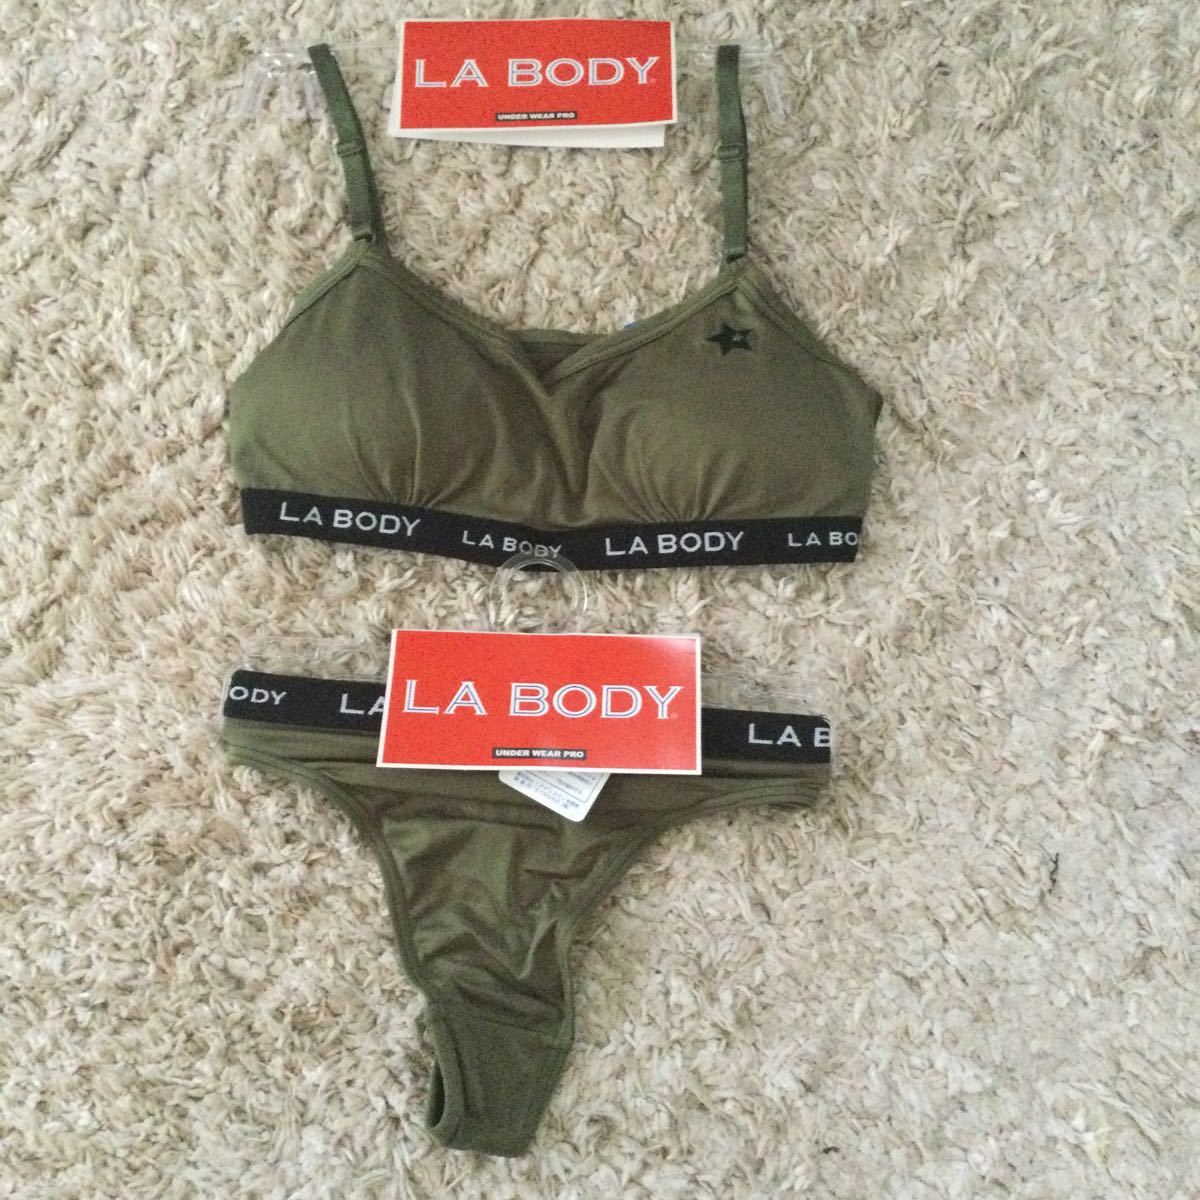  super value exhibition LABODY Lady\'s adult sport Lingerie reset M size khaki tag equipped unused goods 